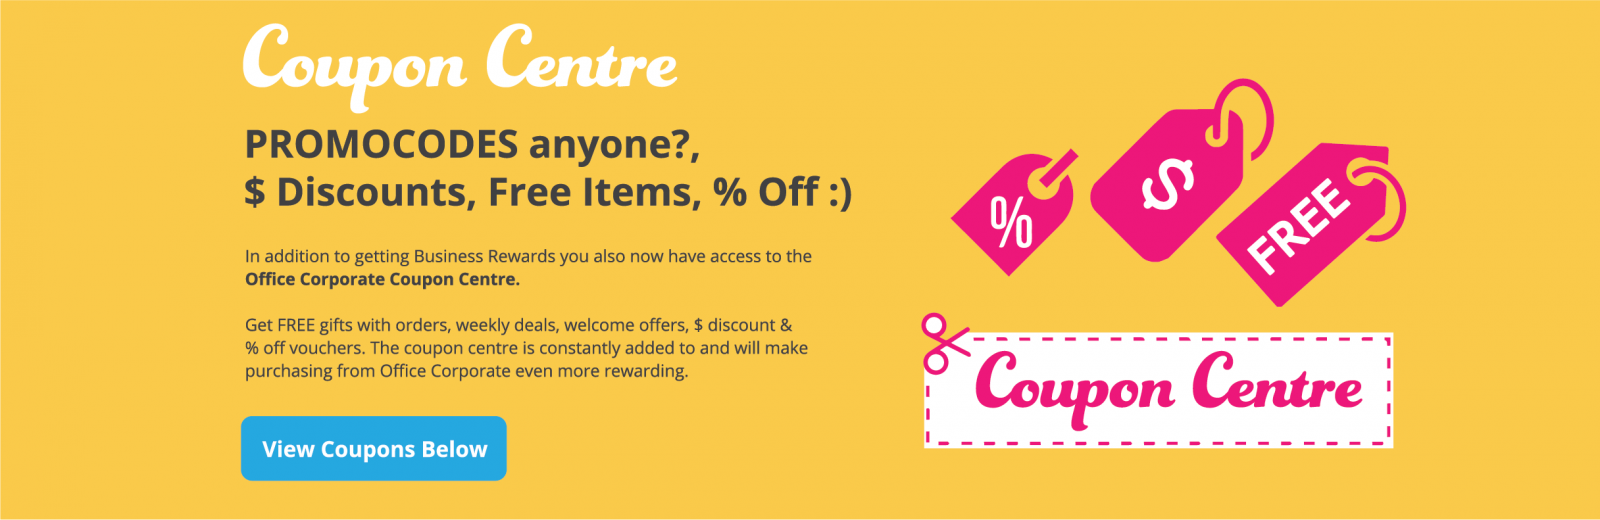 Office Corporate Coupons | Discount stationery